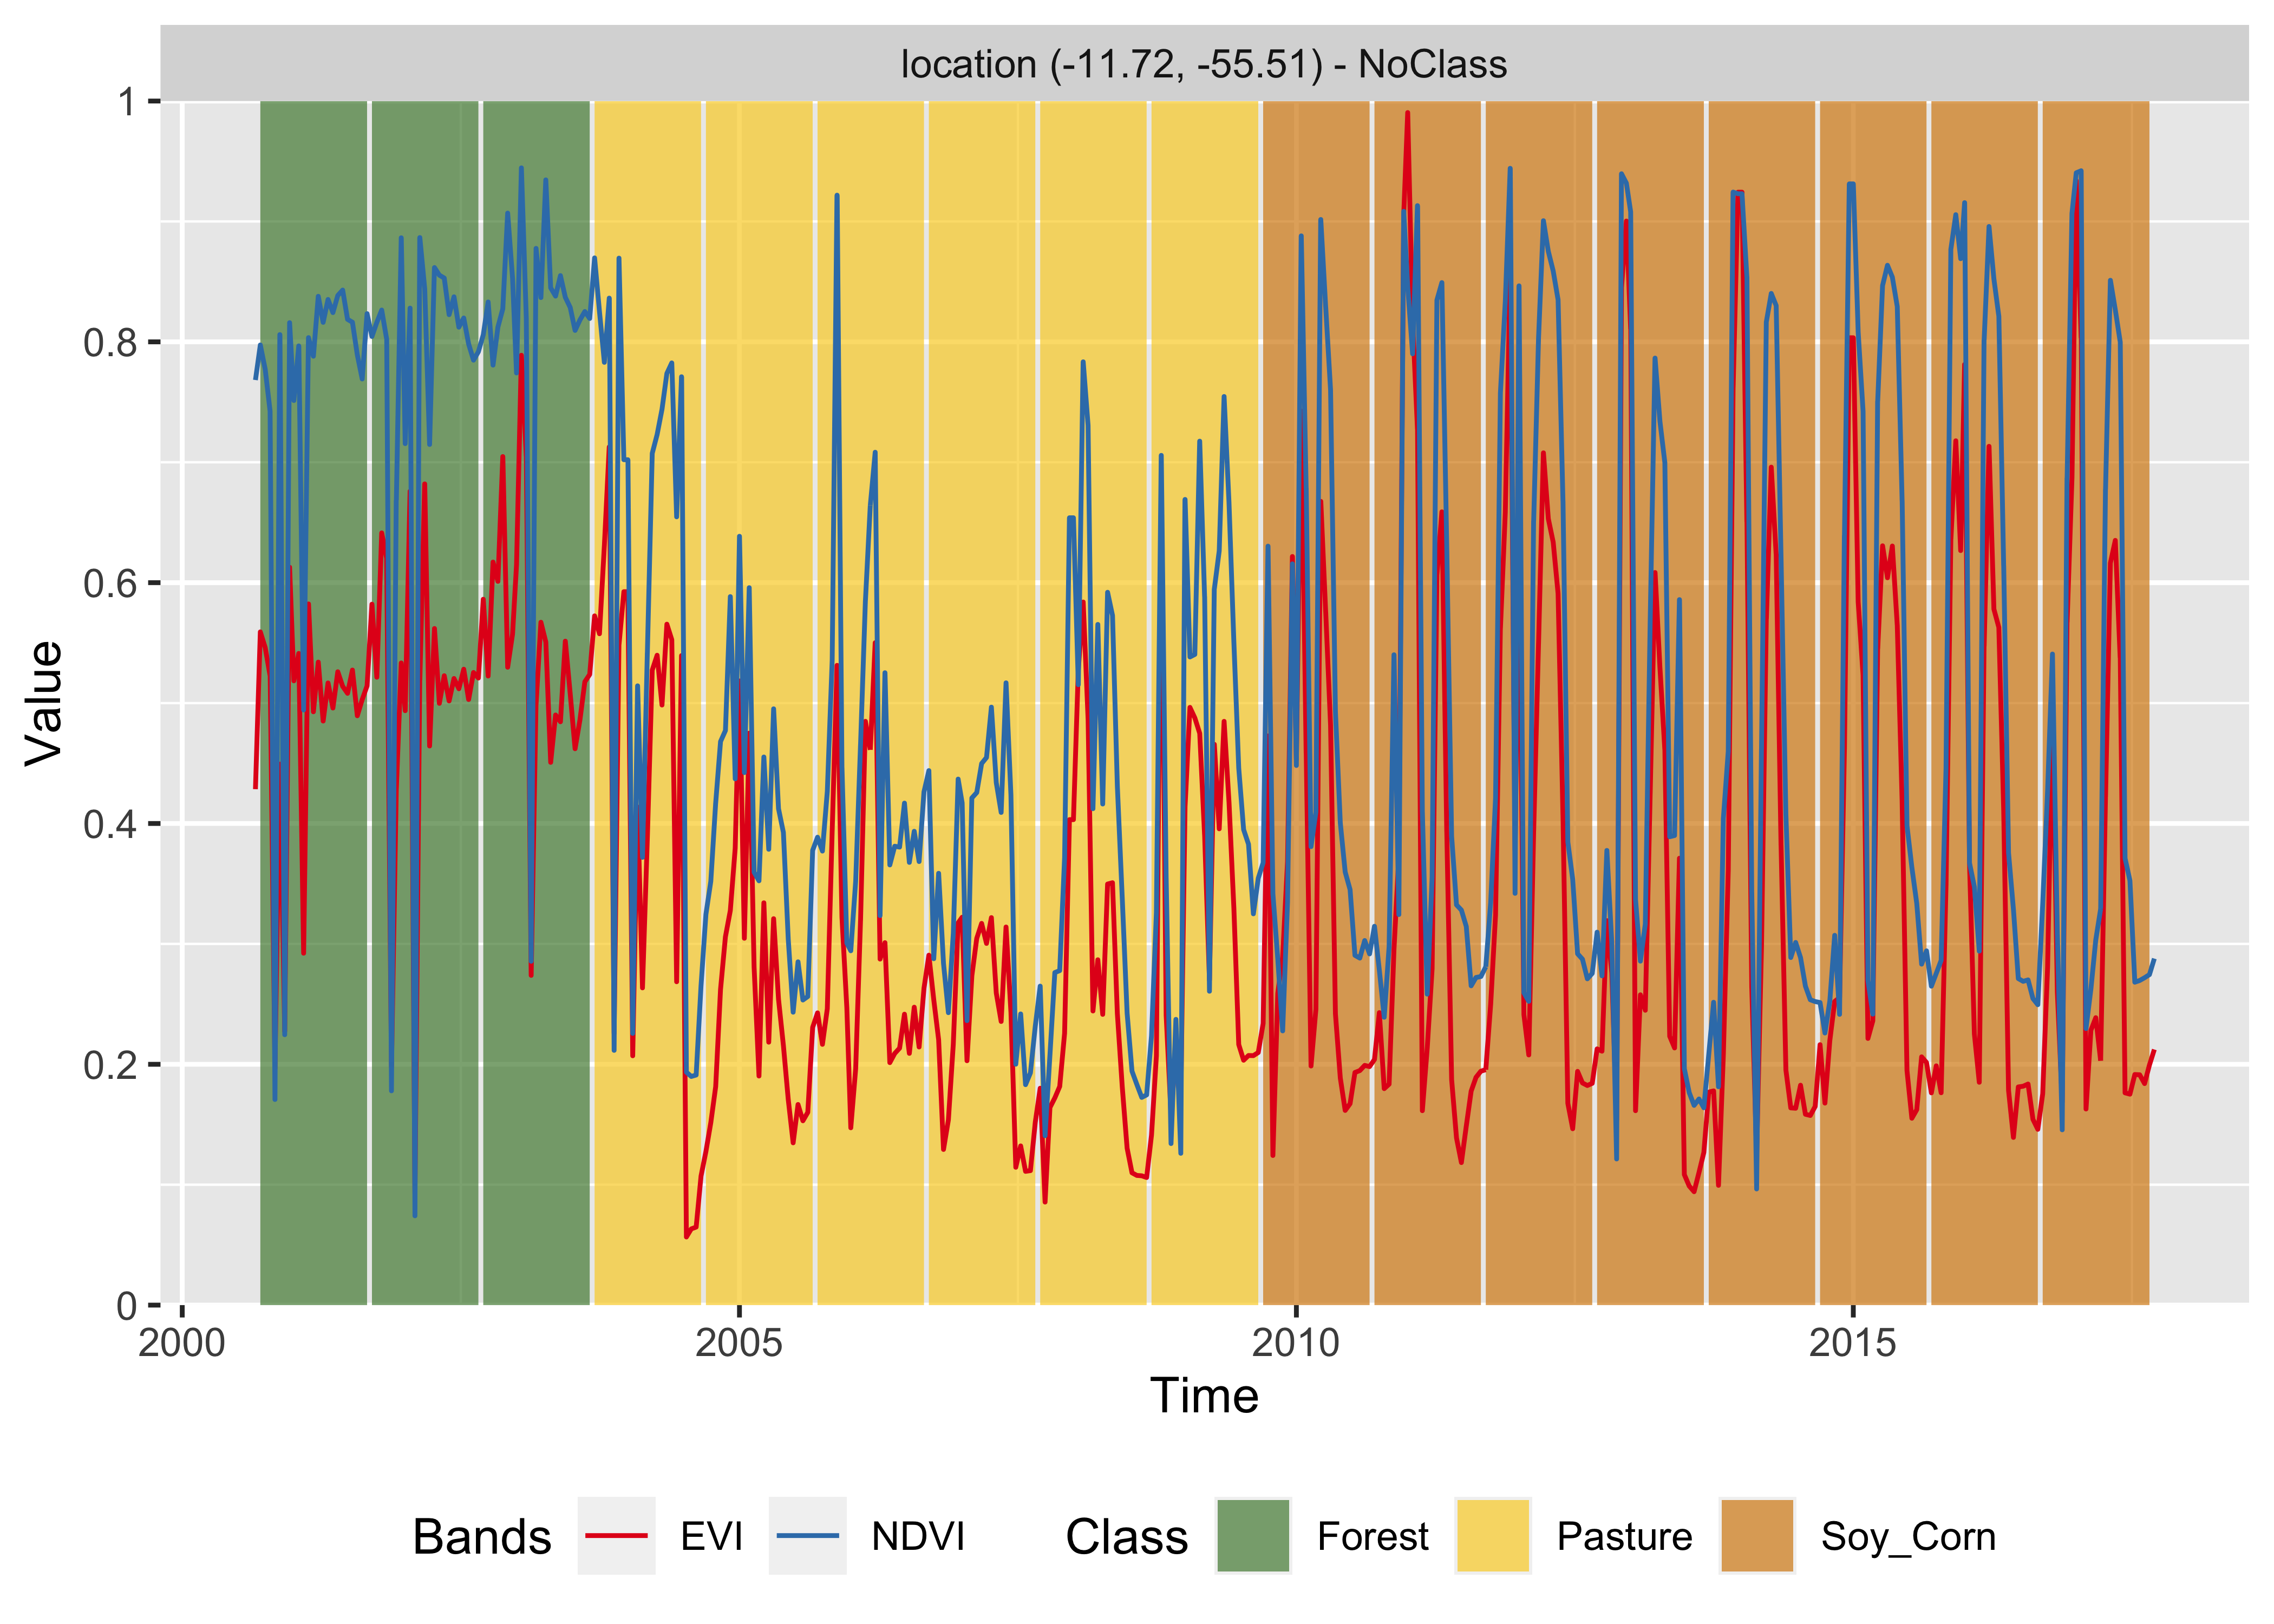 Classification of time series using random forest (Source: Authors).